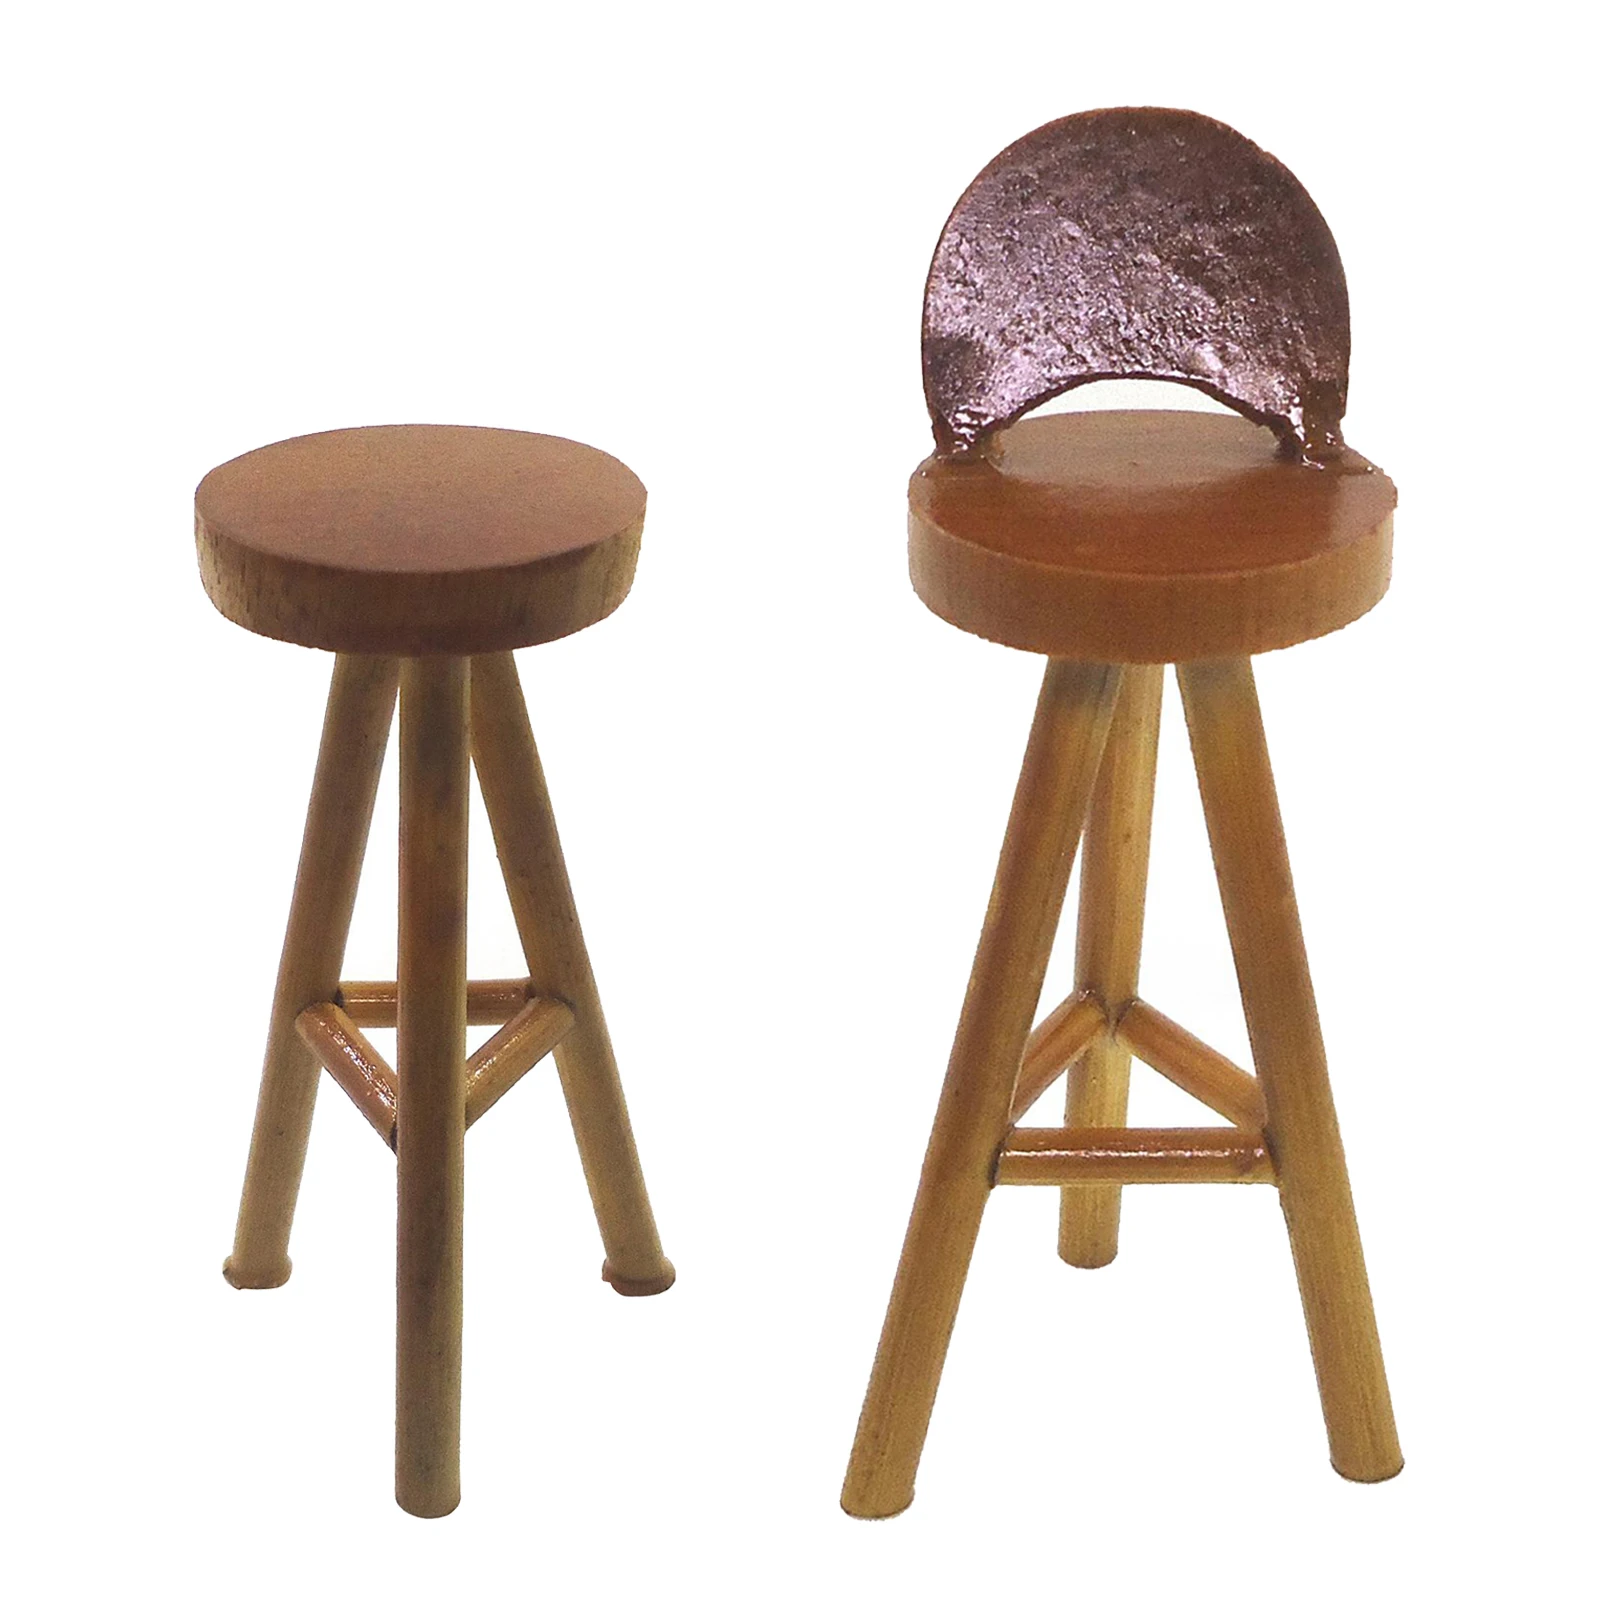 1/12 Miniature Furniture Wooden Chair Bar Stool for Dolls House Living Room Accs 